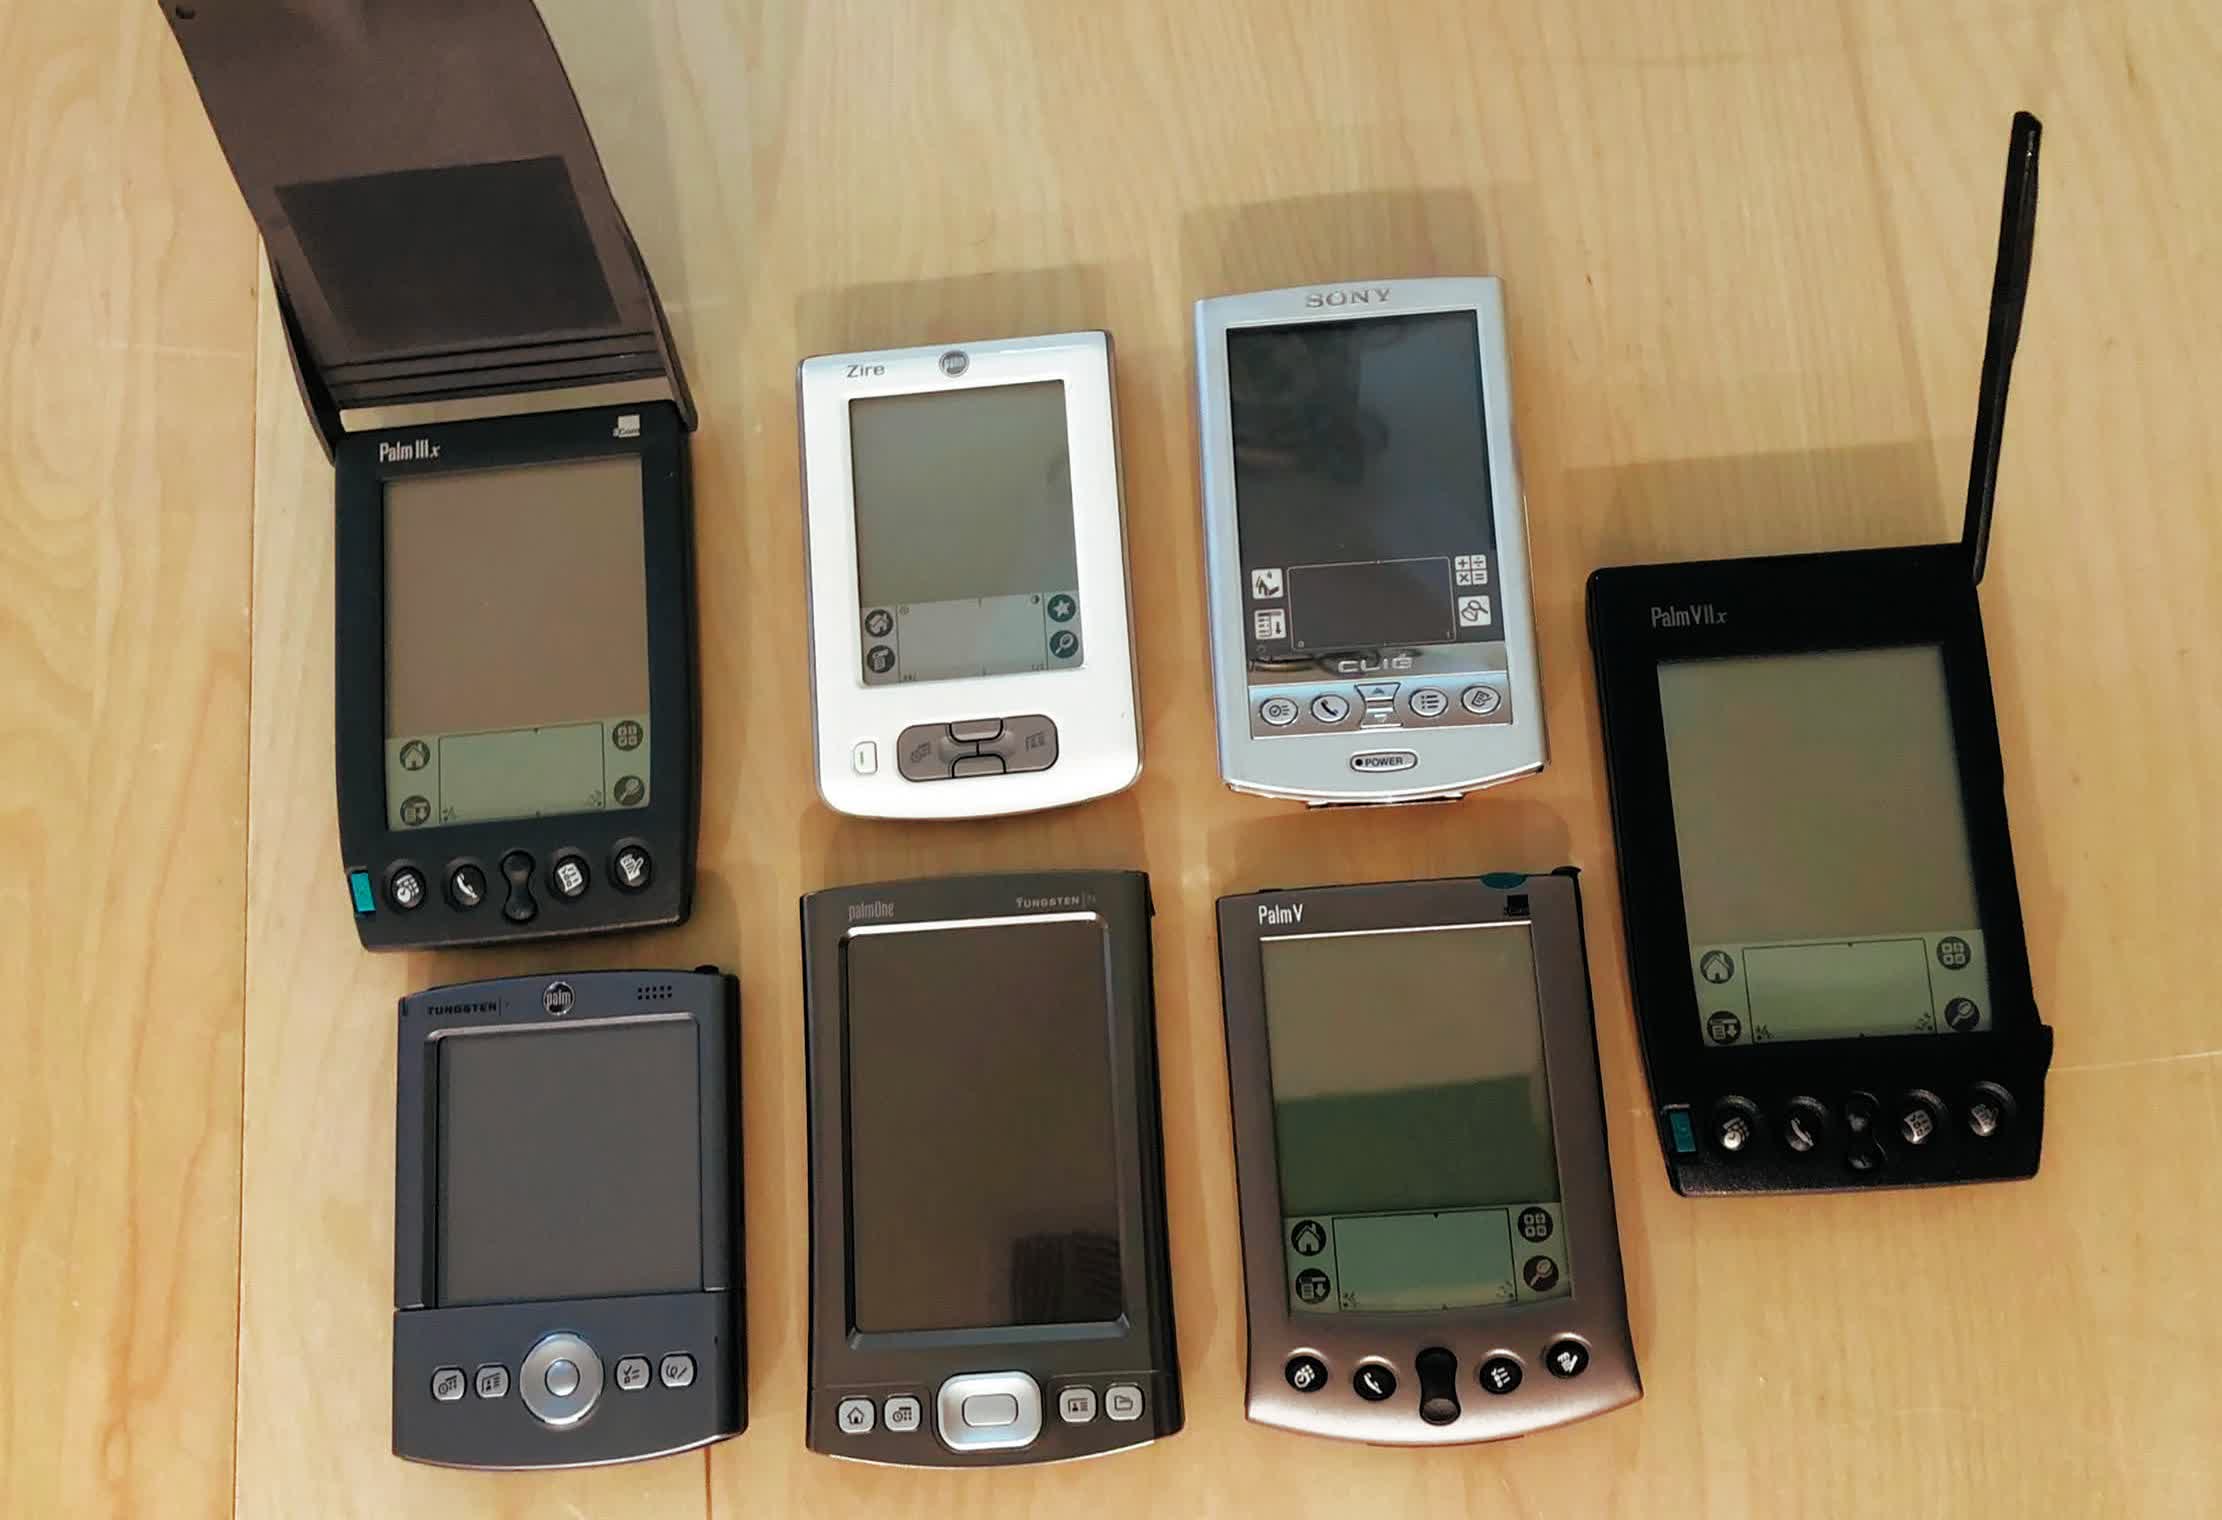 Palm and PalmPilot applications live on thanks to the Internet Archive